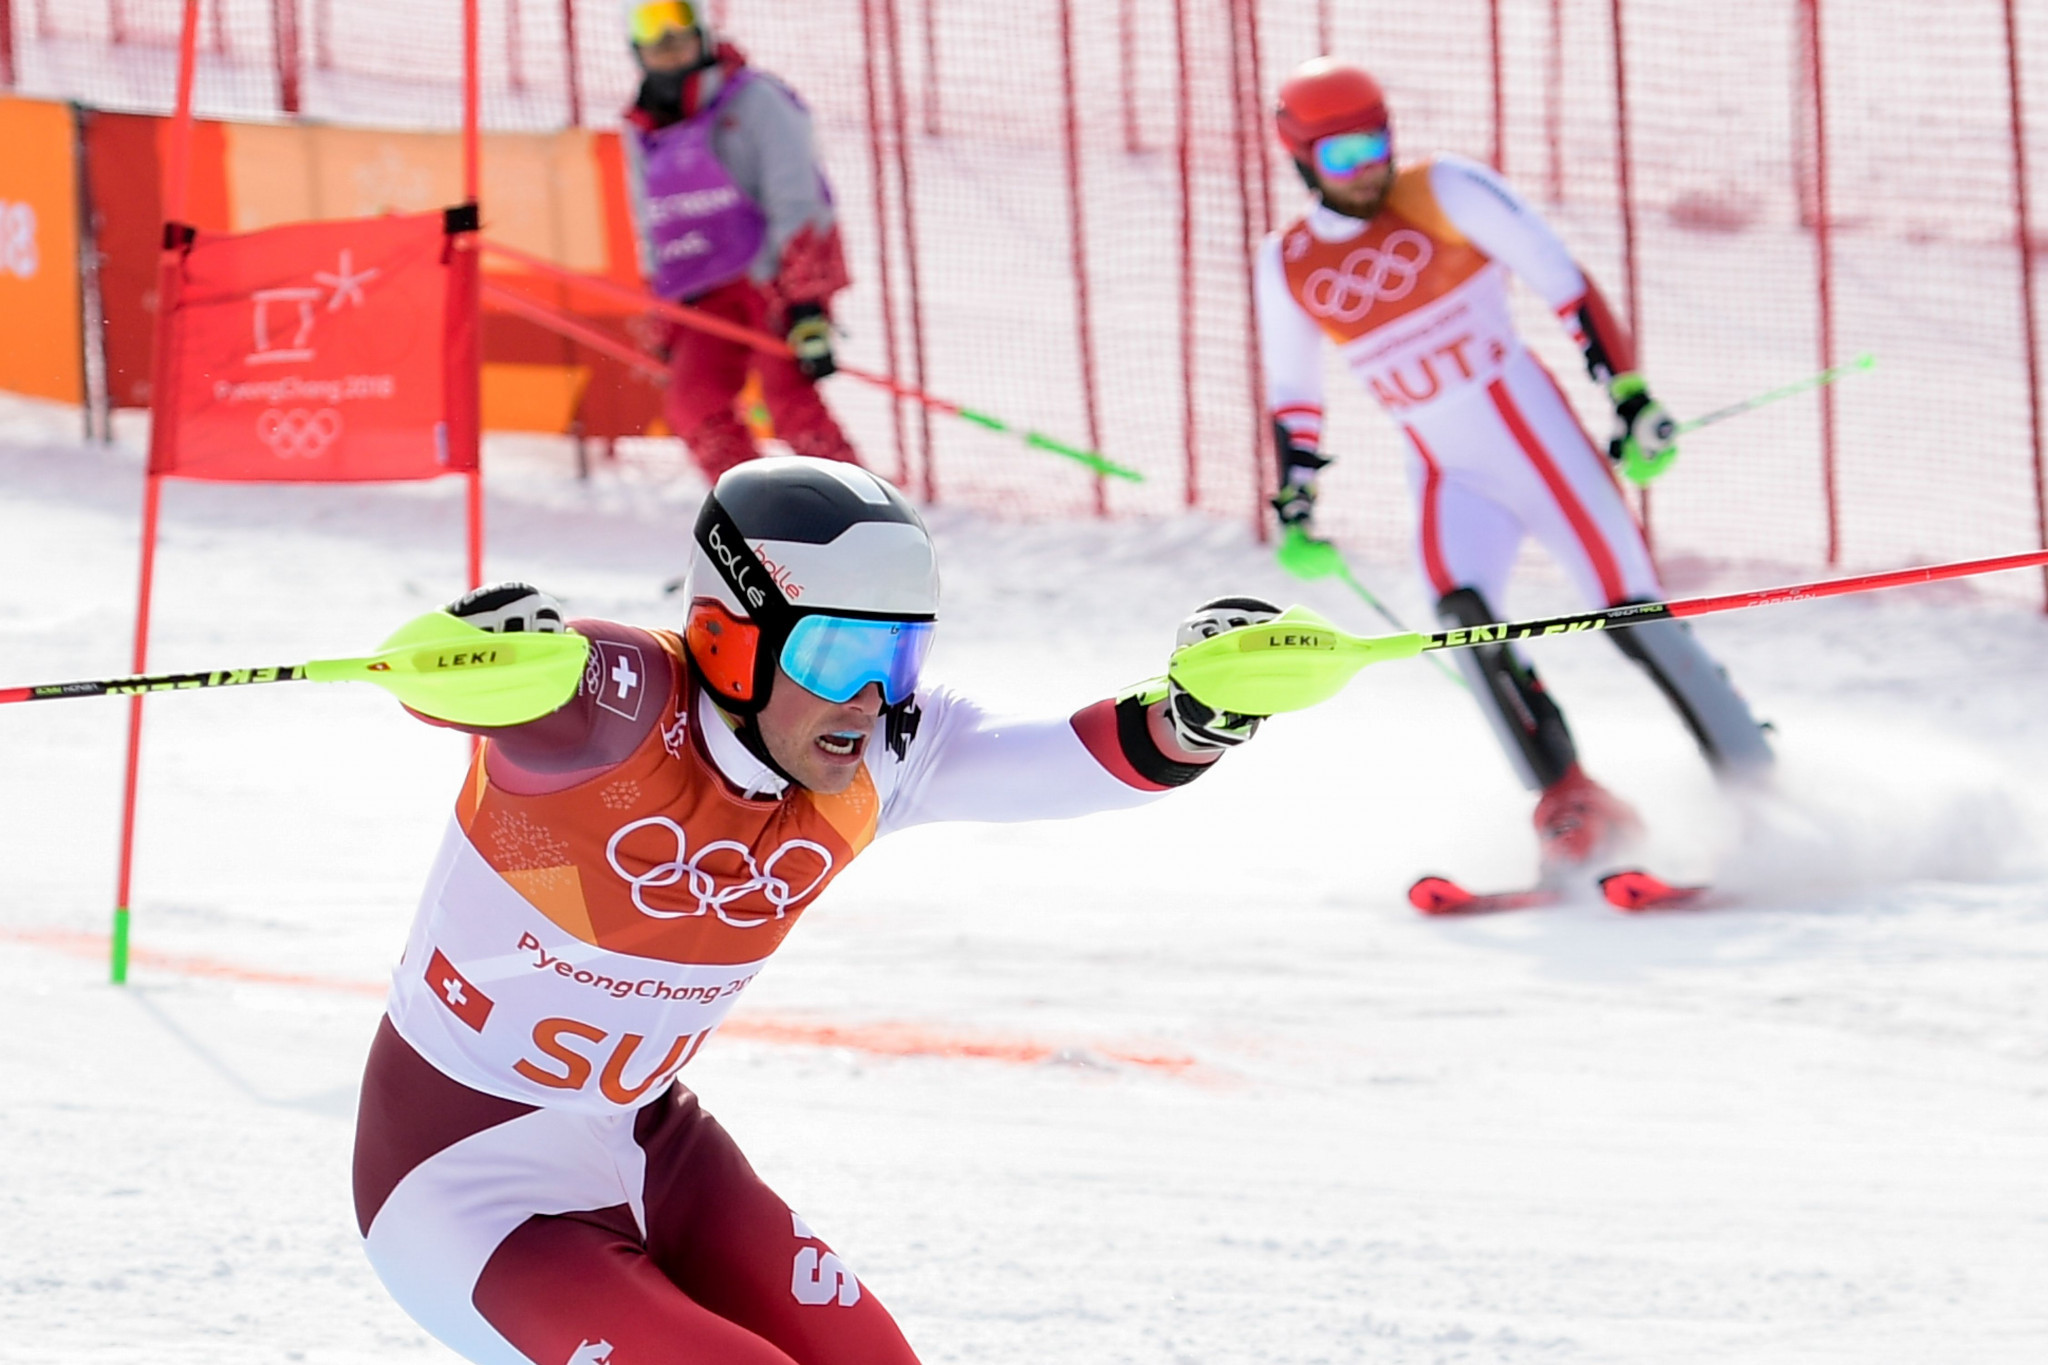 Switzerland won the first-ever Olympic Alpine team event after beating Austria 3-1 in the big final ©Getty Images